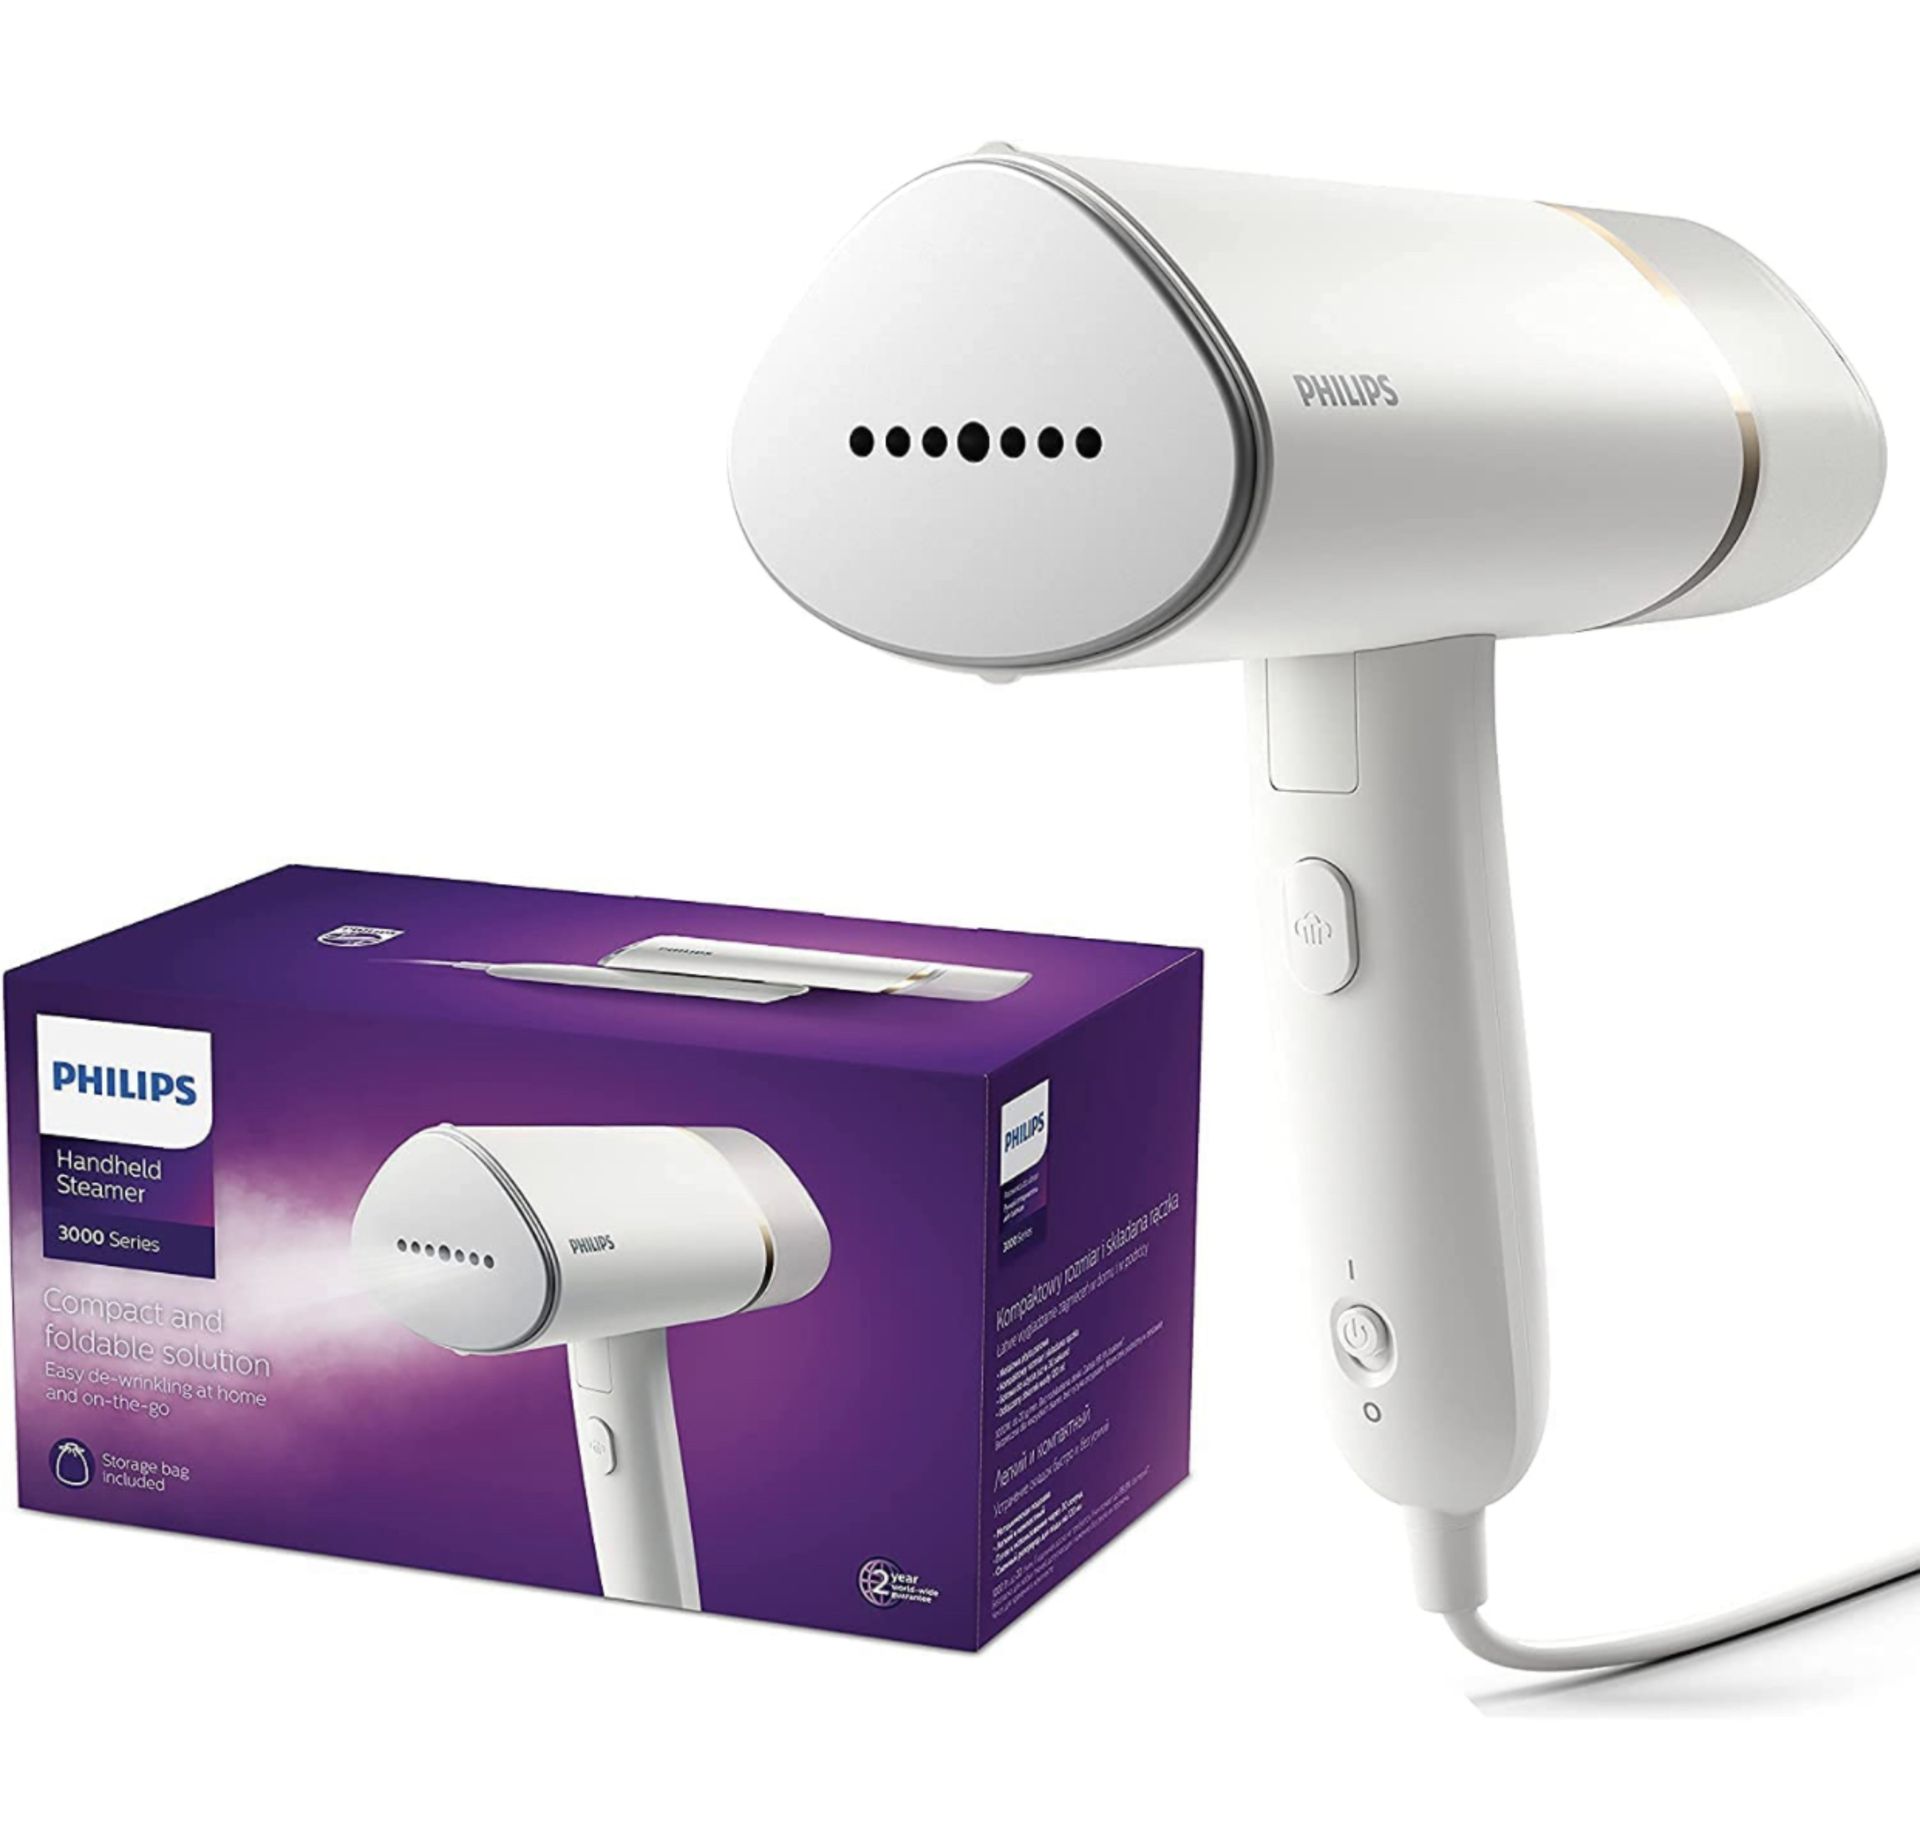 Philips Handheld Steamer 3000 Series Compact and Foldable RRP £49.99